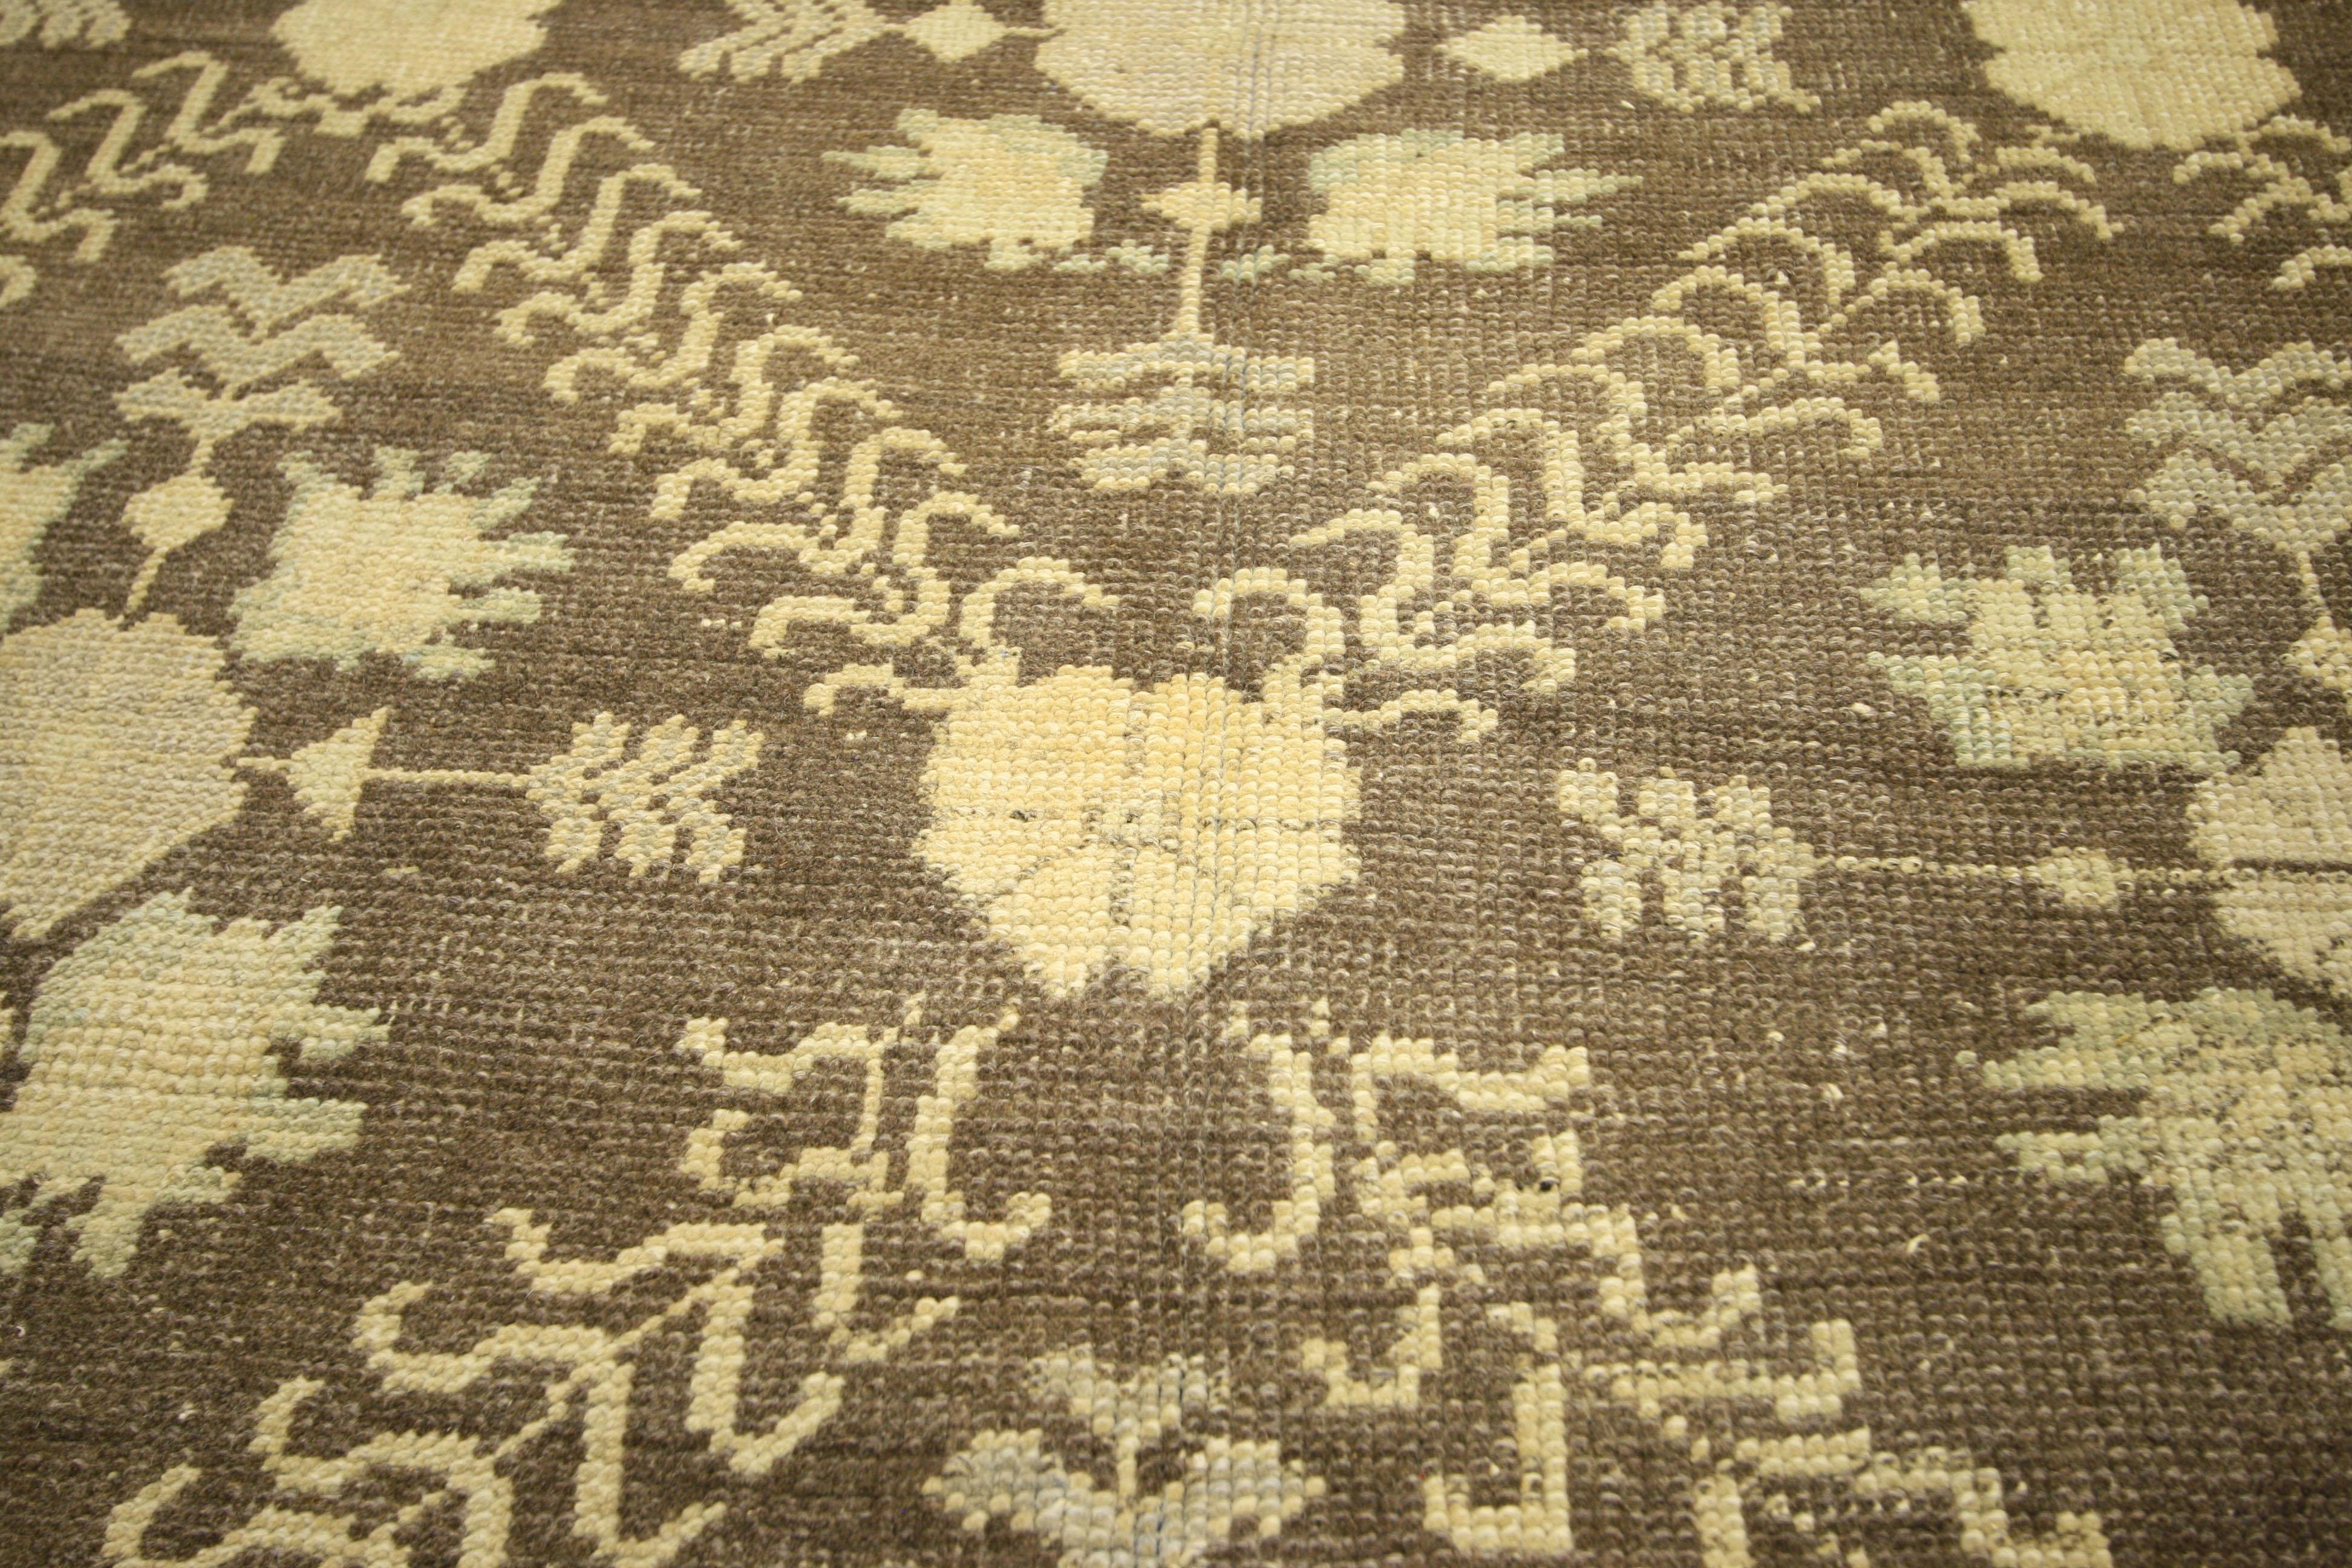 51028 vintage Turkish Oushak rug with English cottage style. This hand knotted wool vintage Turkish Oushak rug features an all-over floral lattice pattern overlaid upon an abrashed ecru field. Rosettes connected by curvy vinery form the trellis,